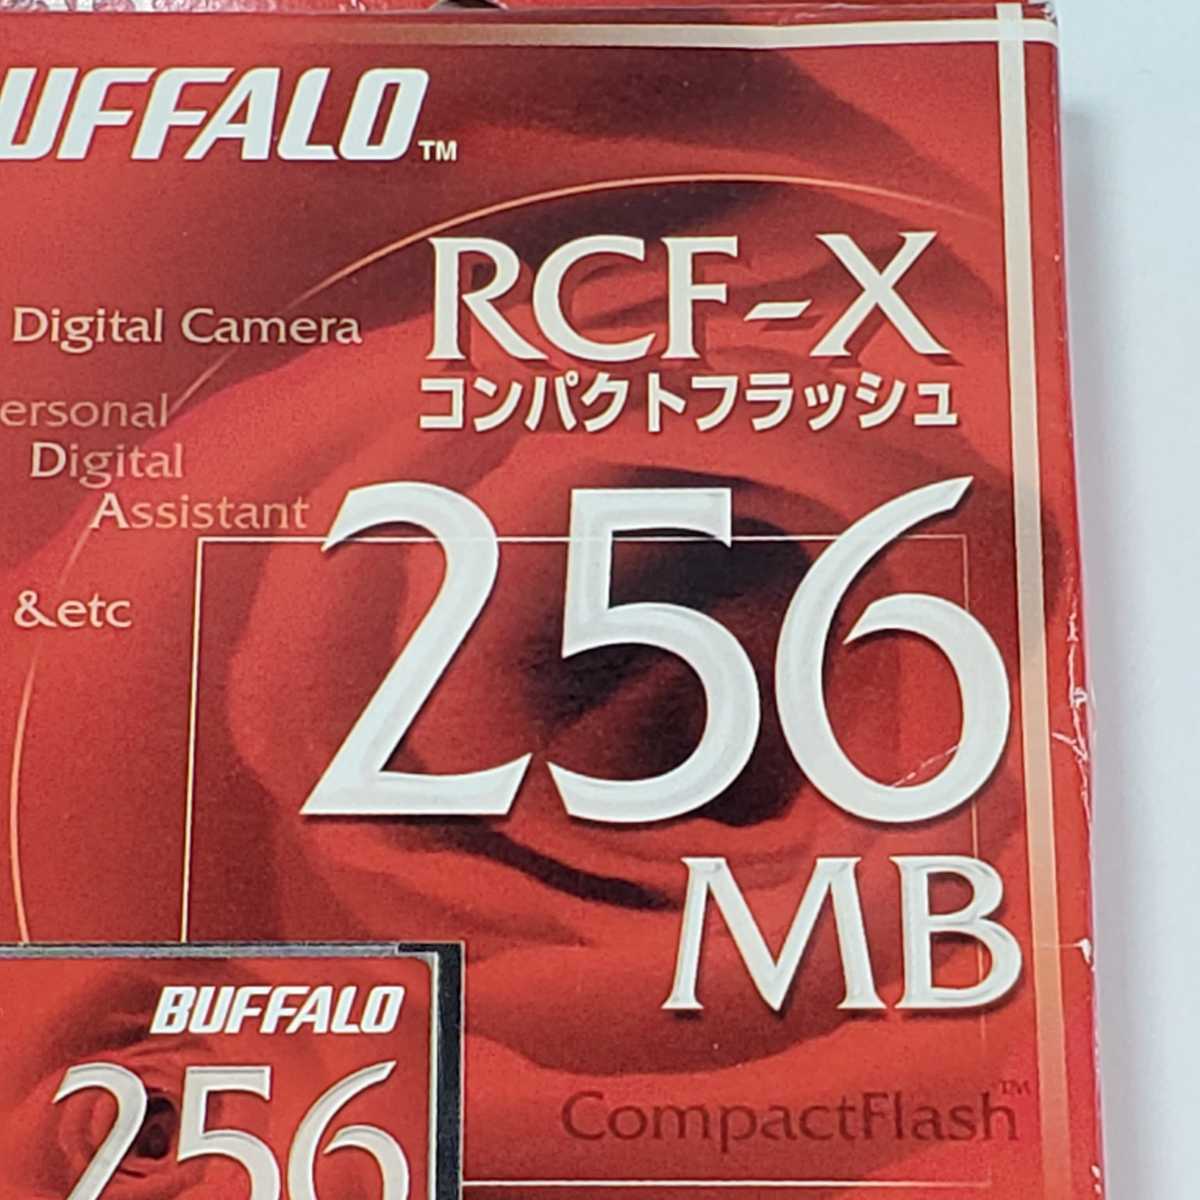 BUFFALO RCF-Xコンパクトフラッシュ 256MB RCF-X256MY 未使用品